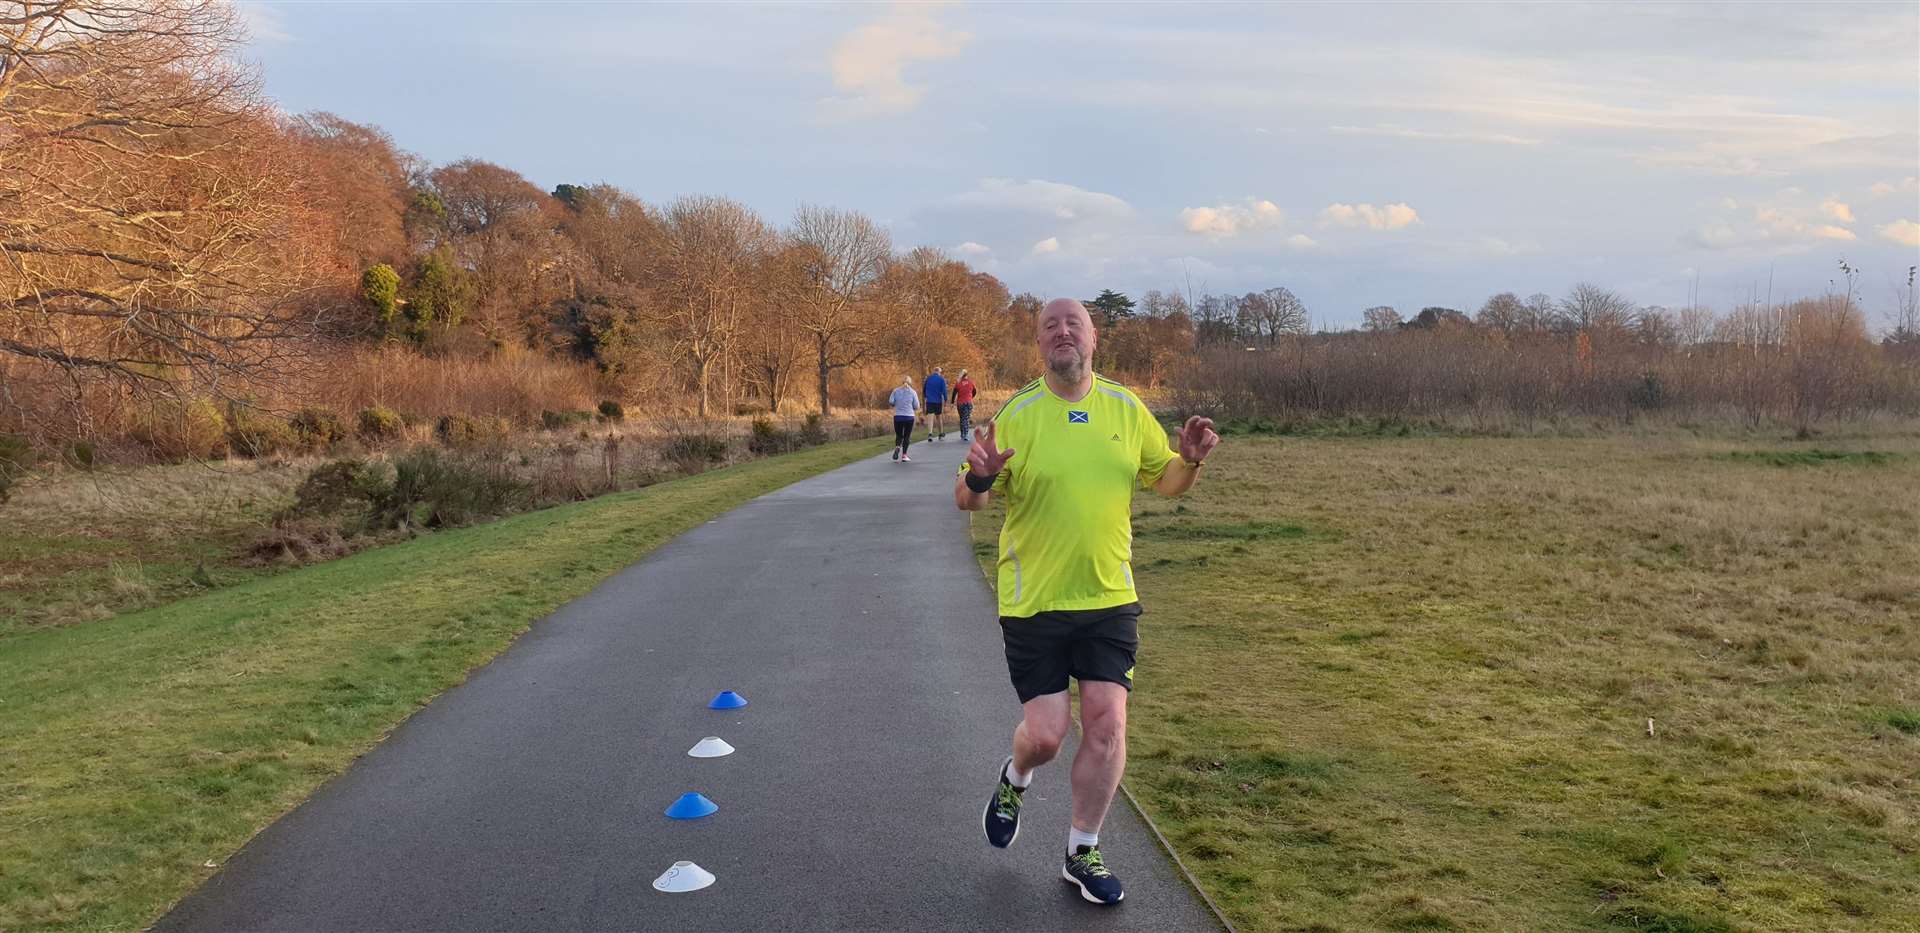 Paul Jamieson on the way to completing his first parkrun in a while after injury.